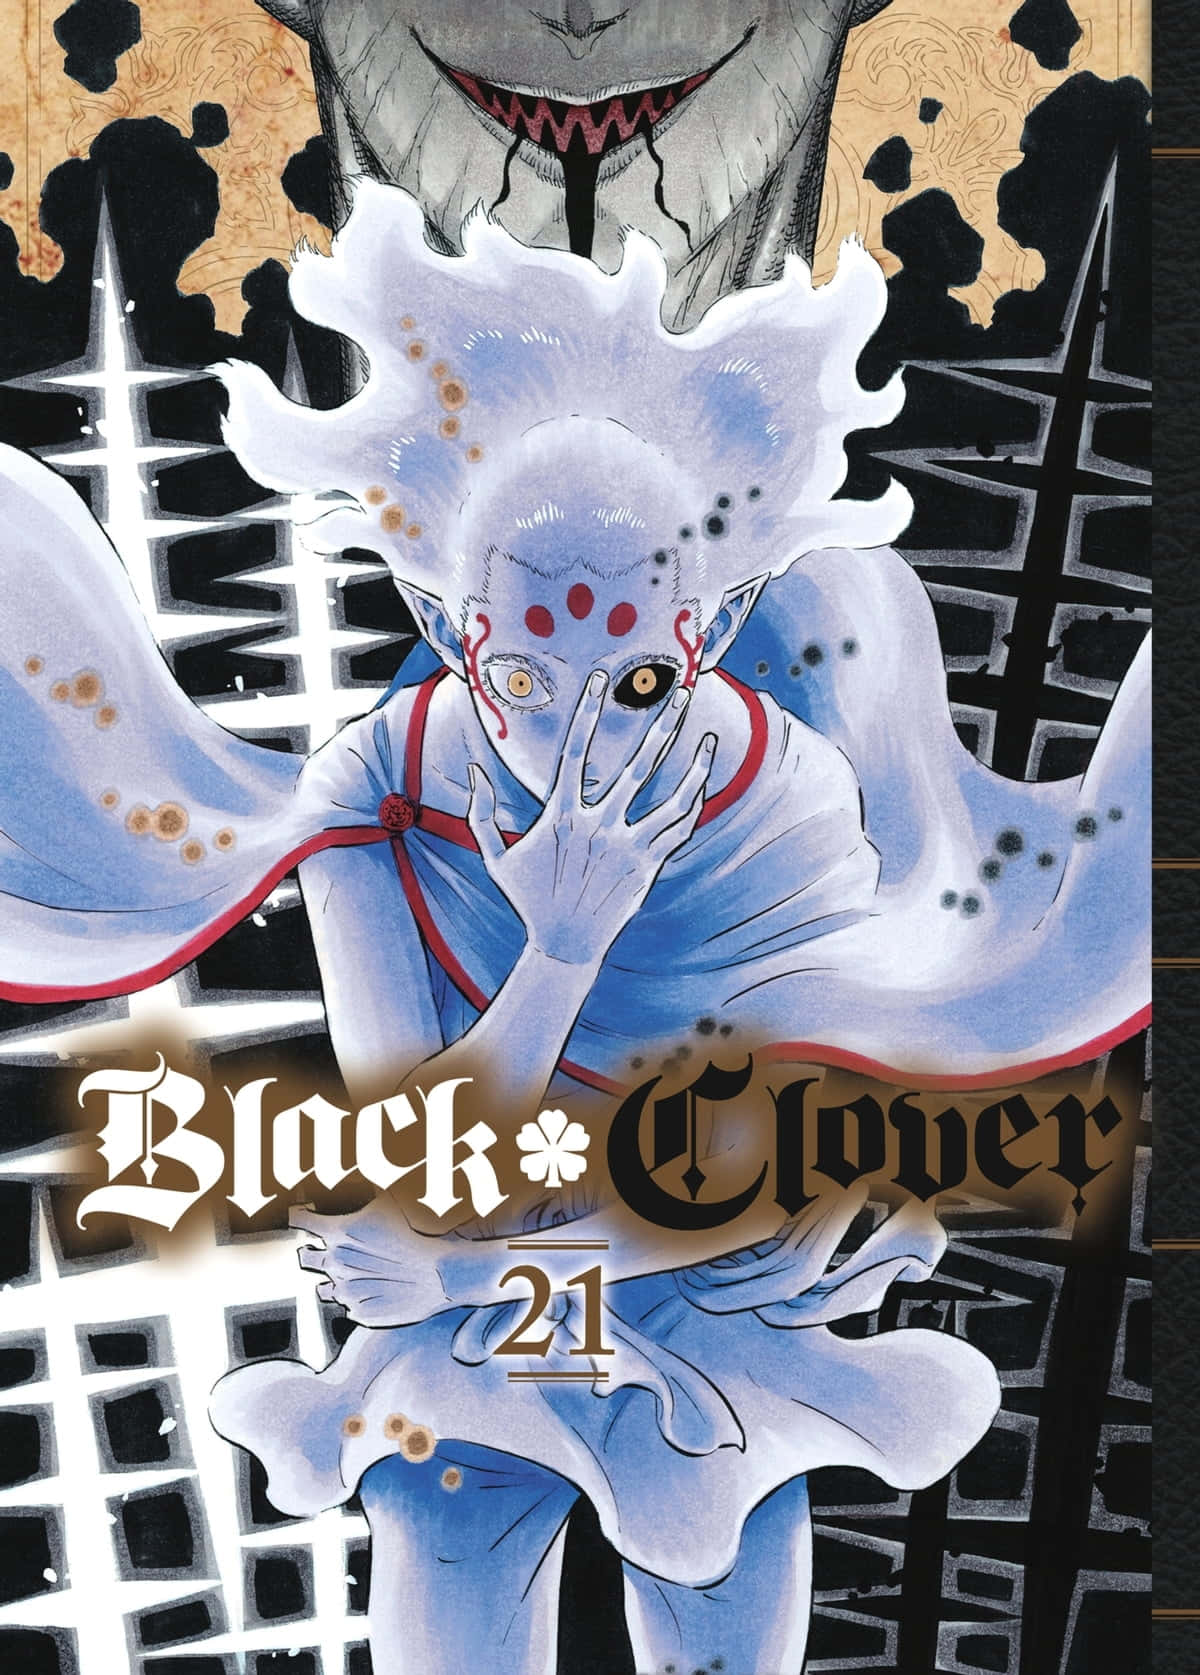 "The Magic Knights of Black Clover Symbolising Strength and Justice"